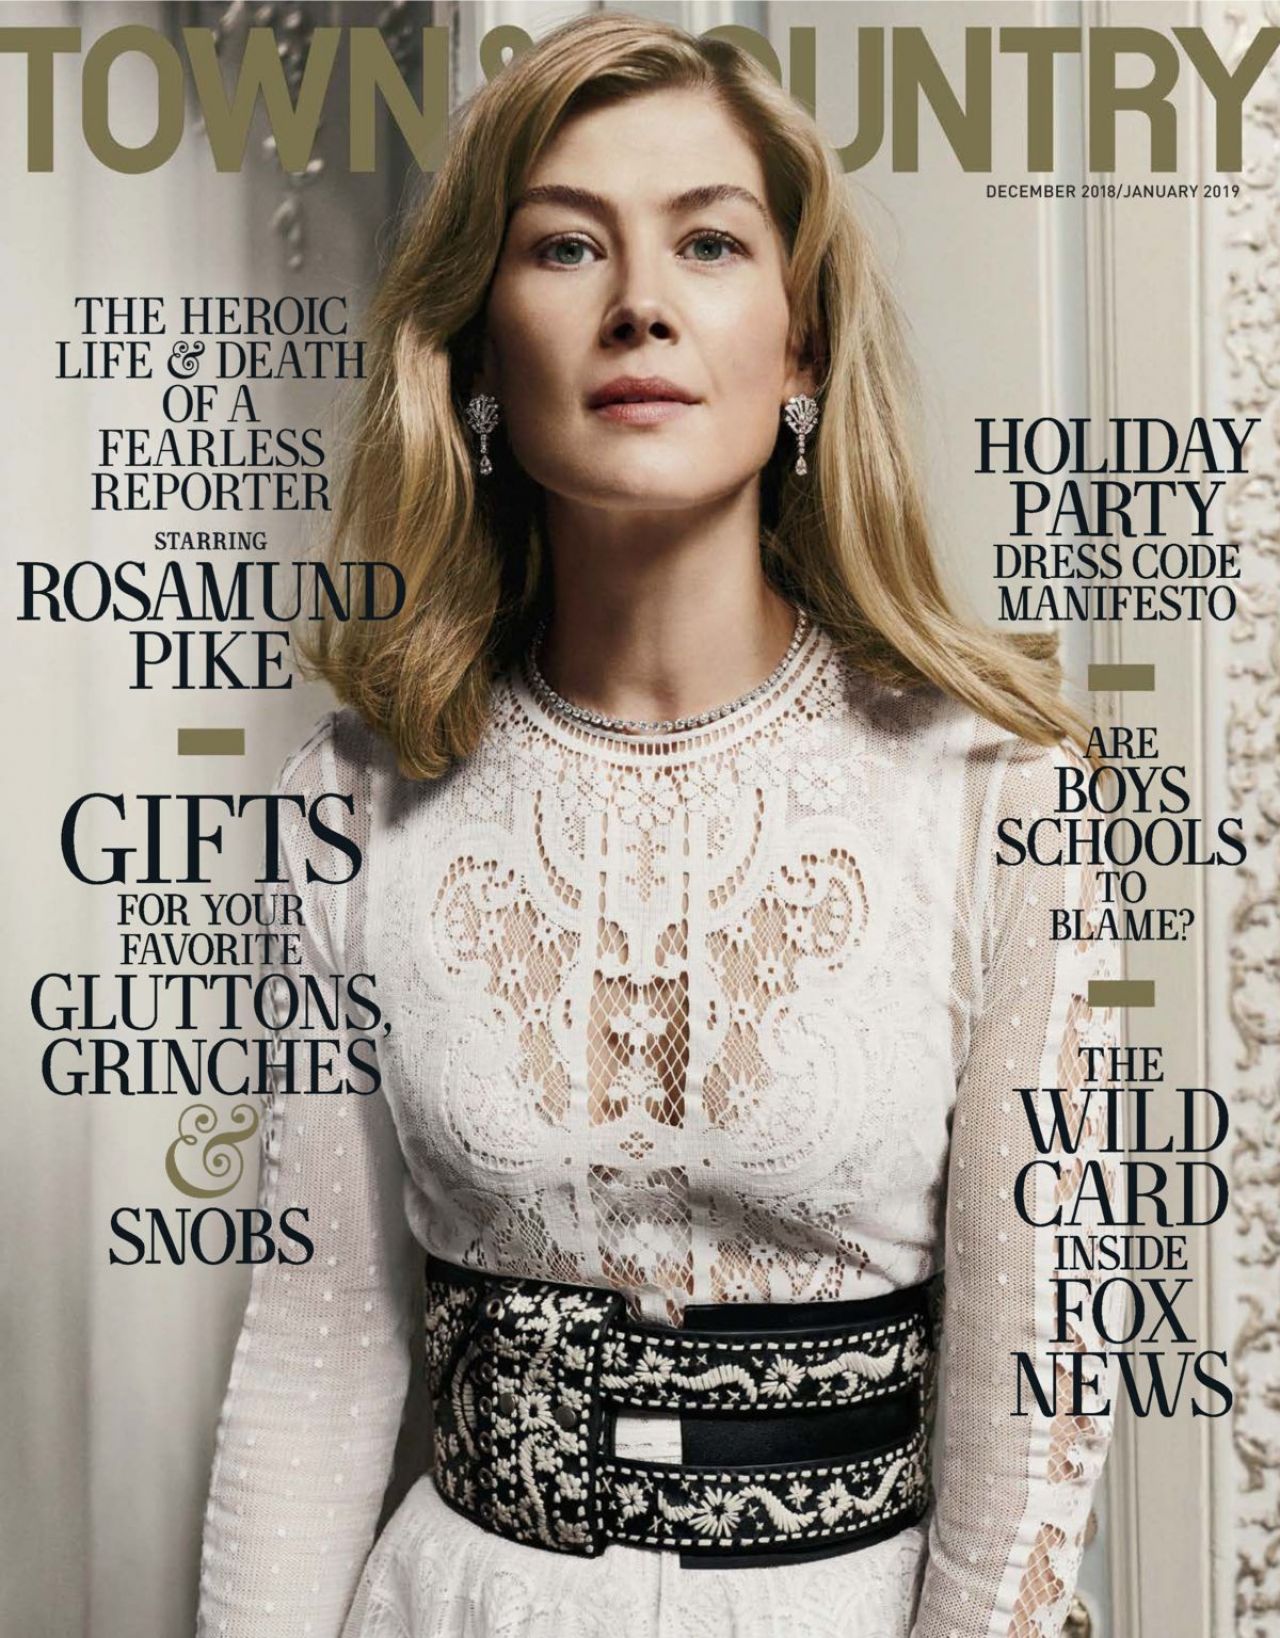 rosamund-pike-town-country-magazine-usa-2018-december-2019-january-issue-0.jpg